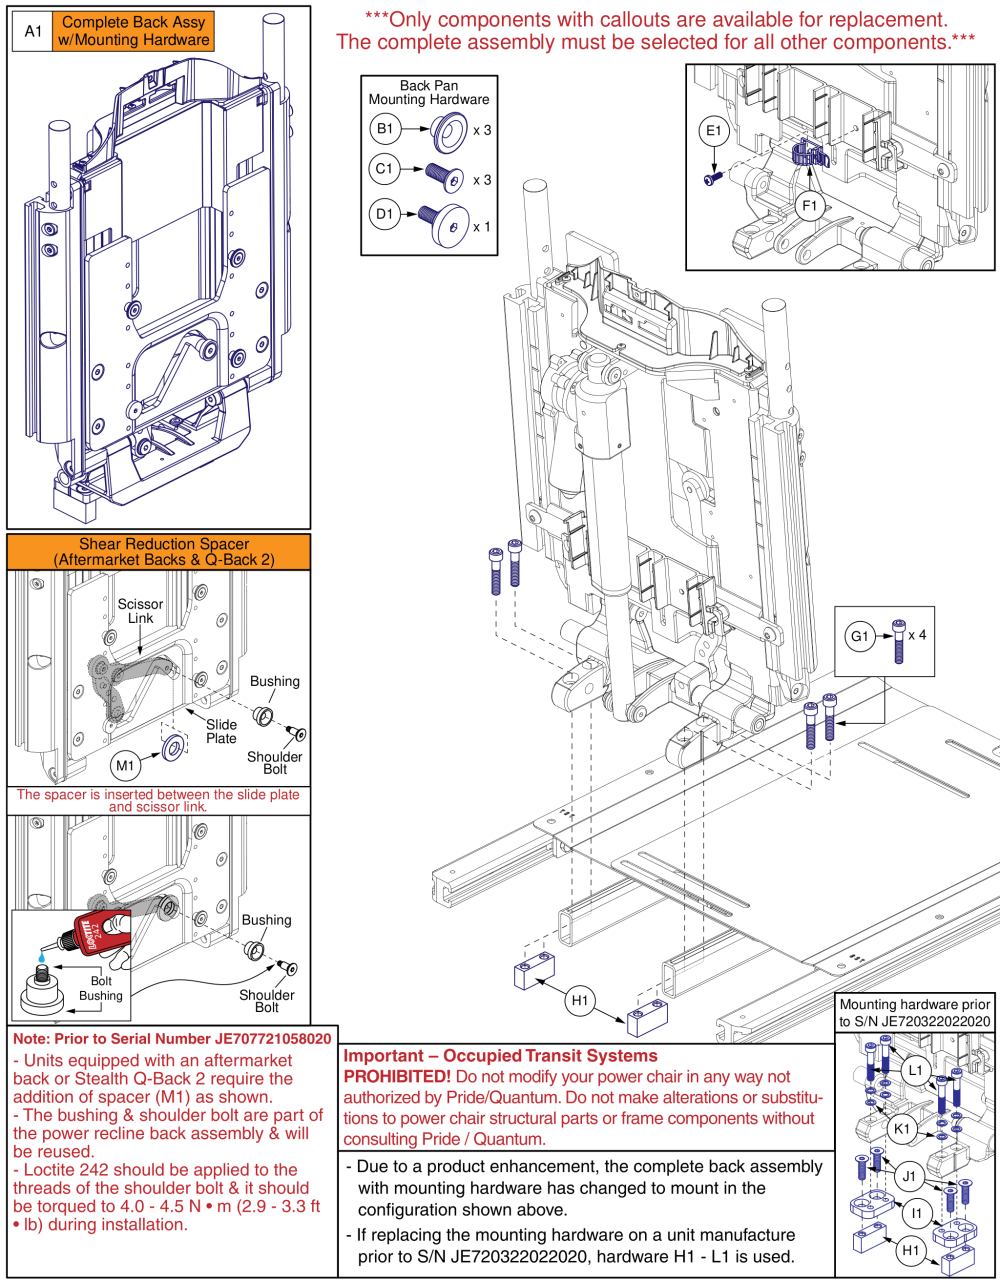 Recline Back Assy, Static Base, Tb3 Redesigned Back, Wc19 parts diagram